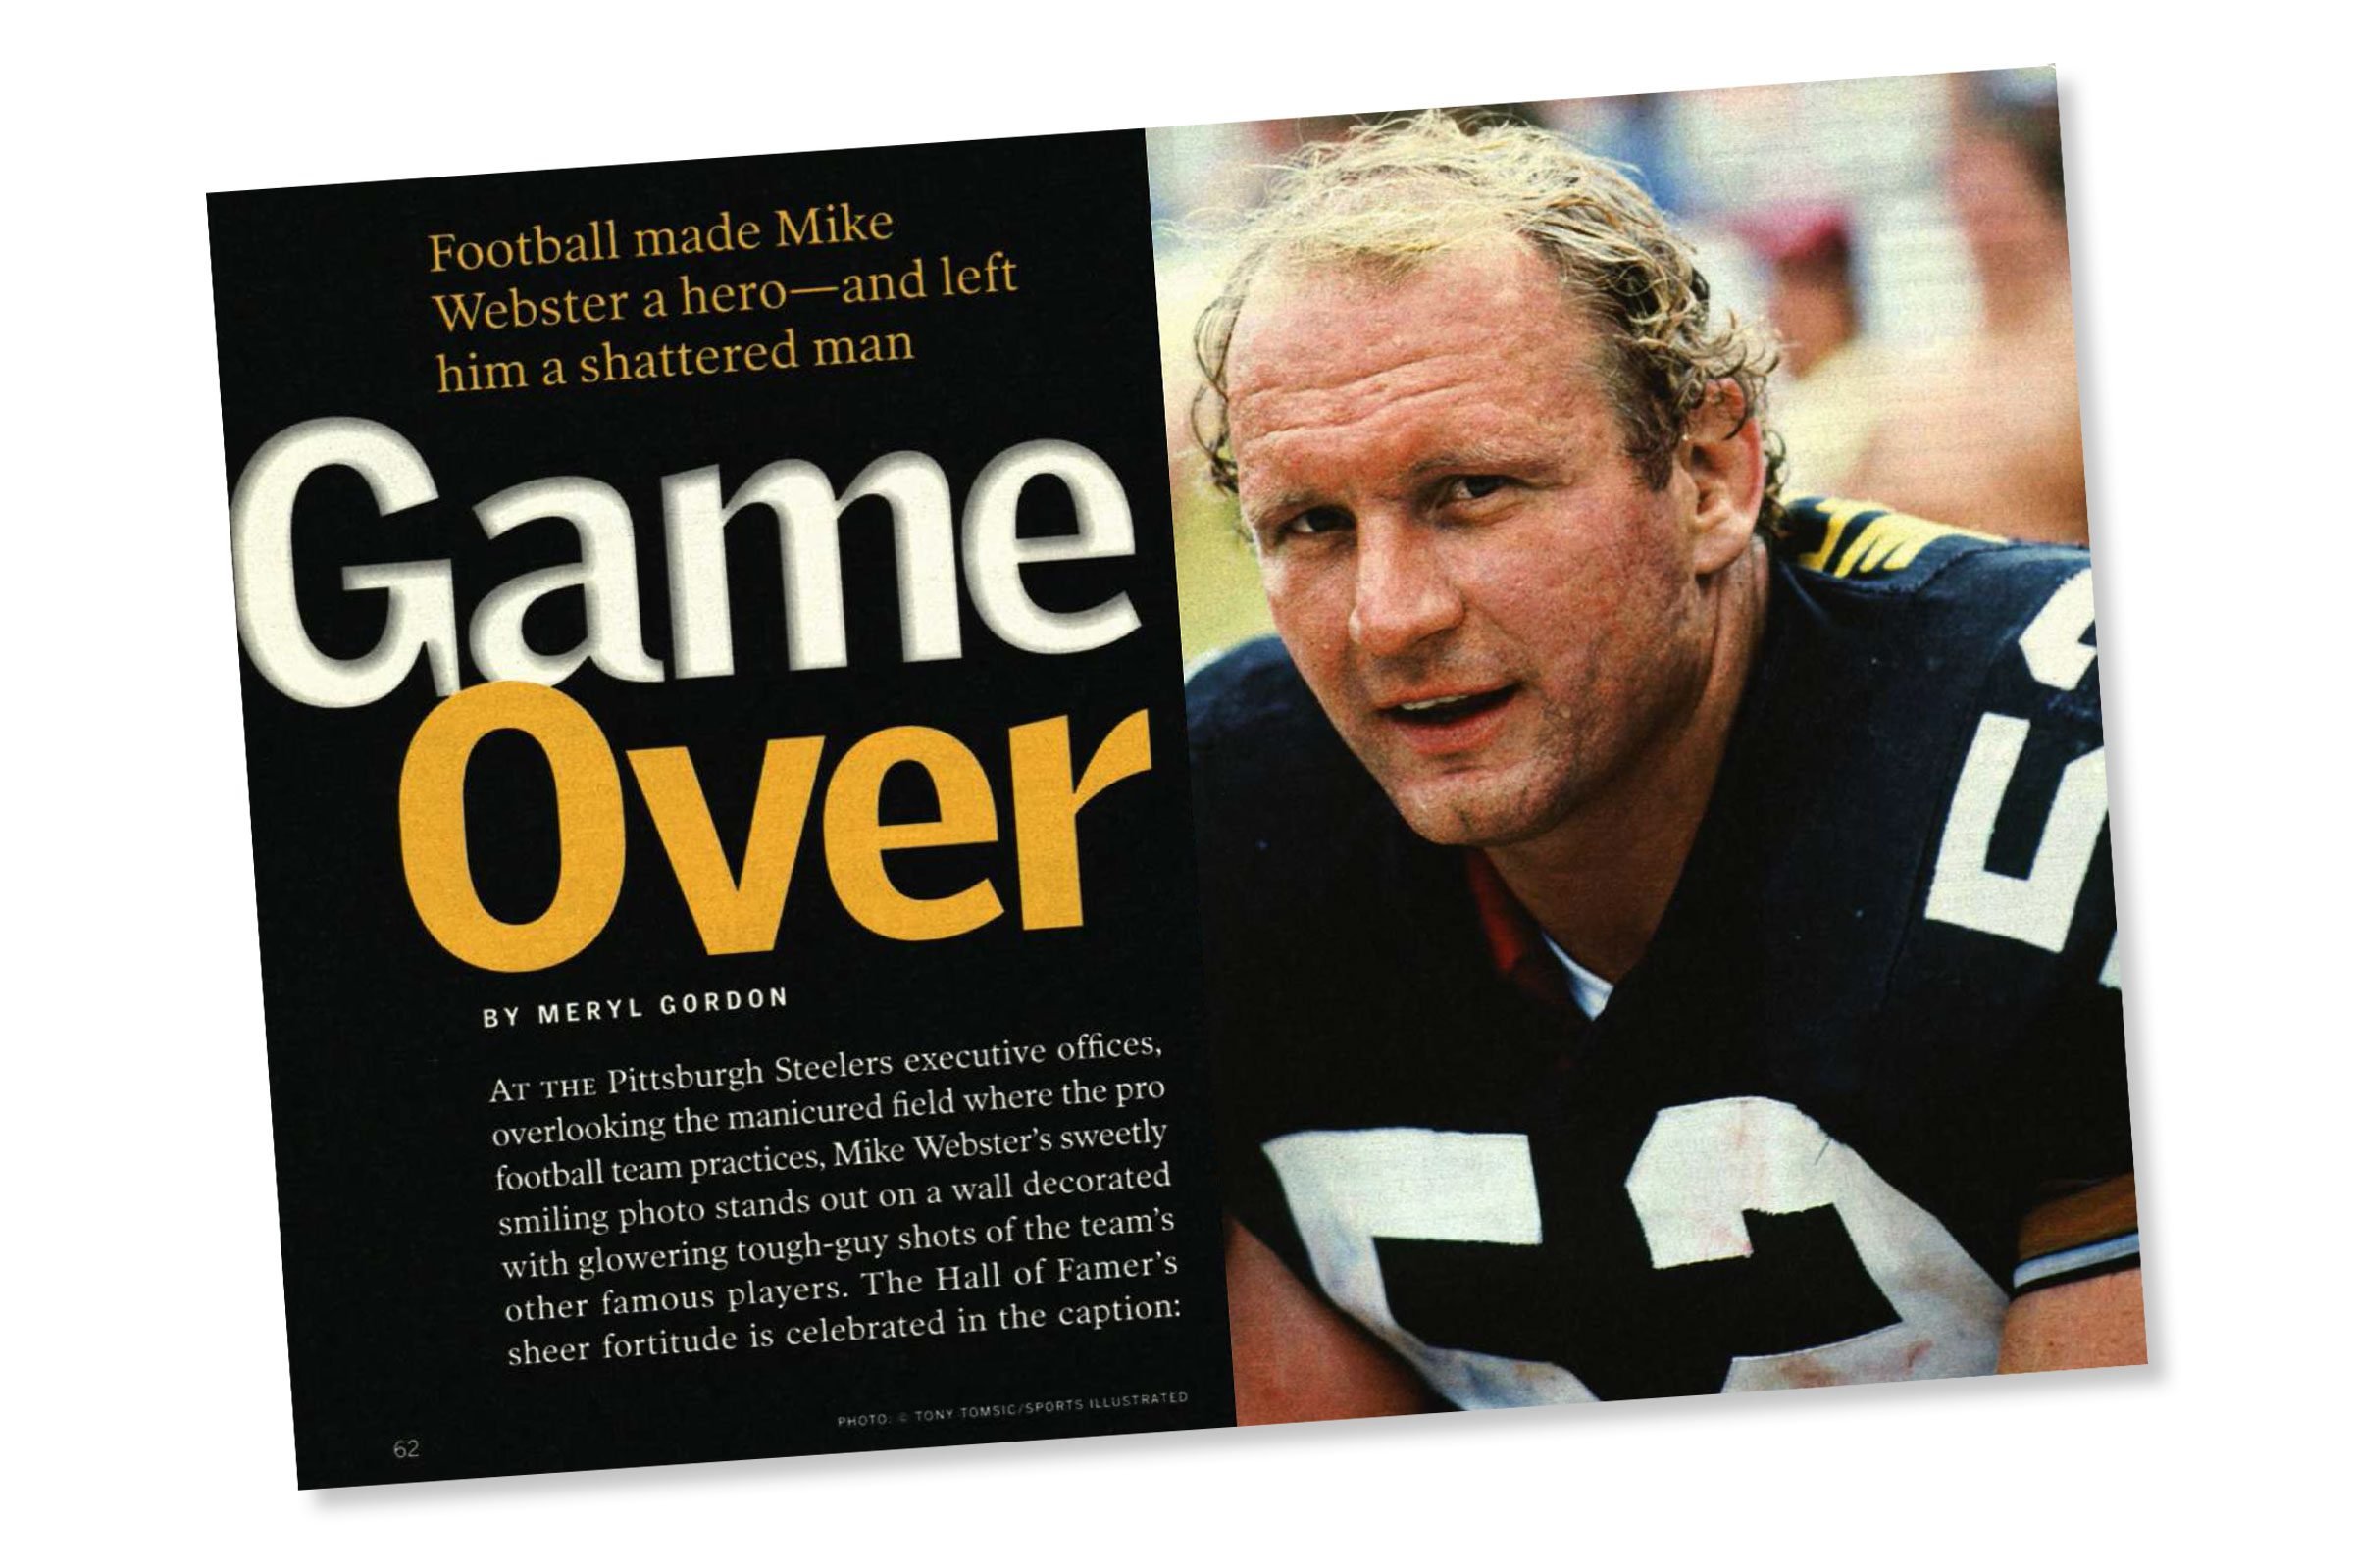 Before 'Concussion': An Inside Glimpse of NFL Player Mike Webster's Utterly Tragic Final Days